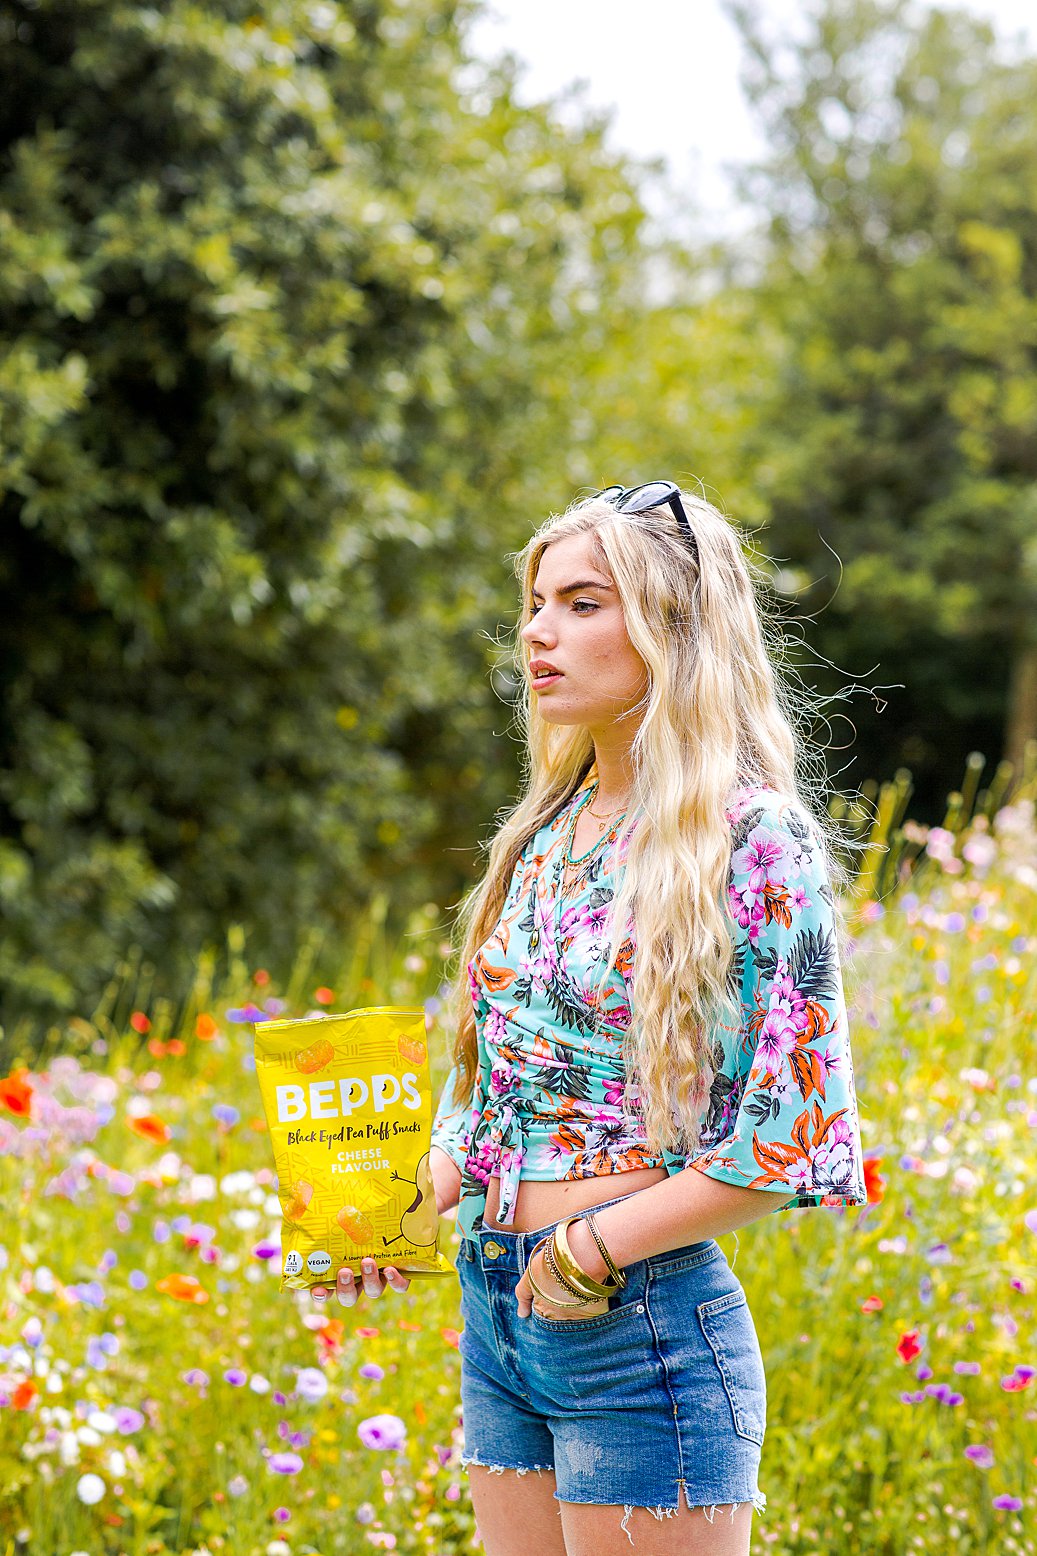 Colourful content creation for Bepps Snacks. Product & lifestyle photography by Marianne Taylor.